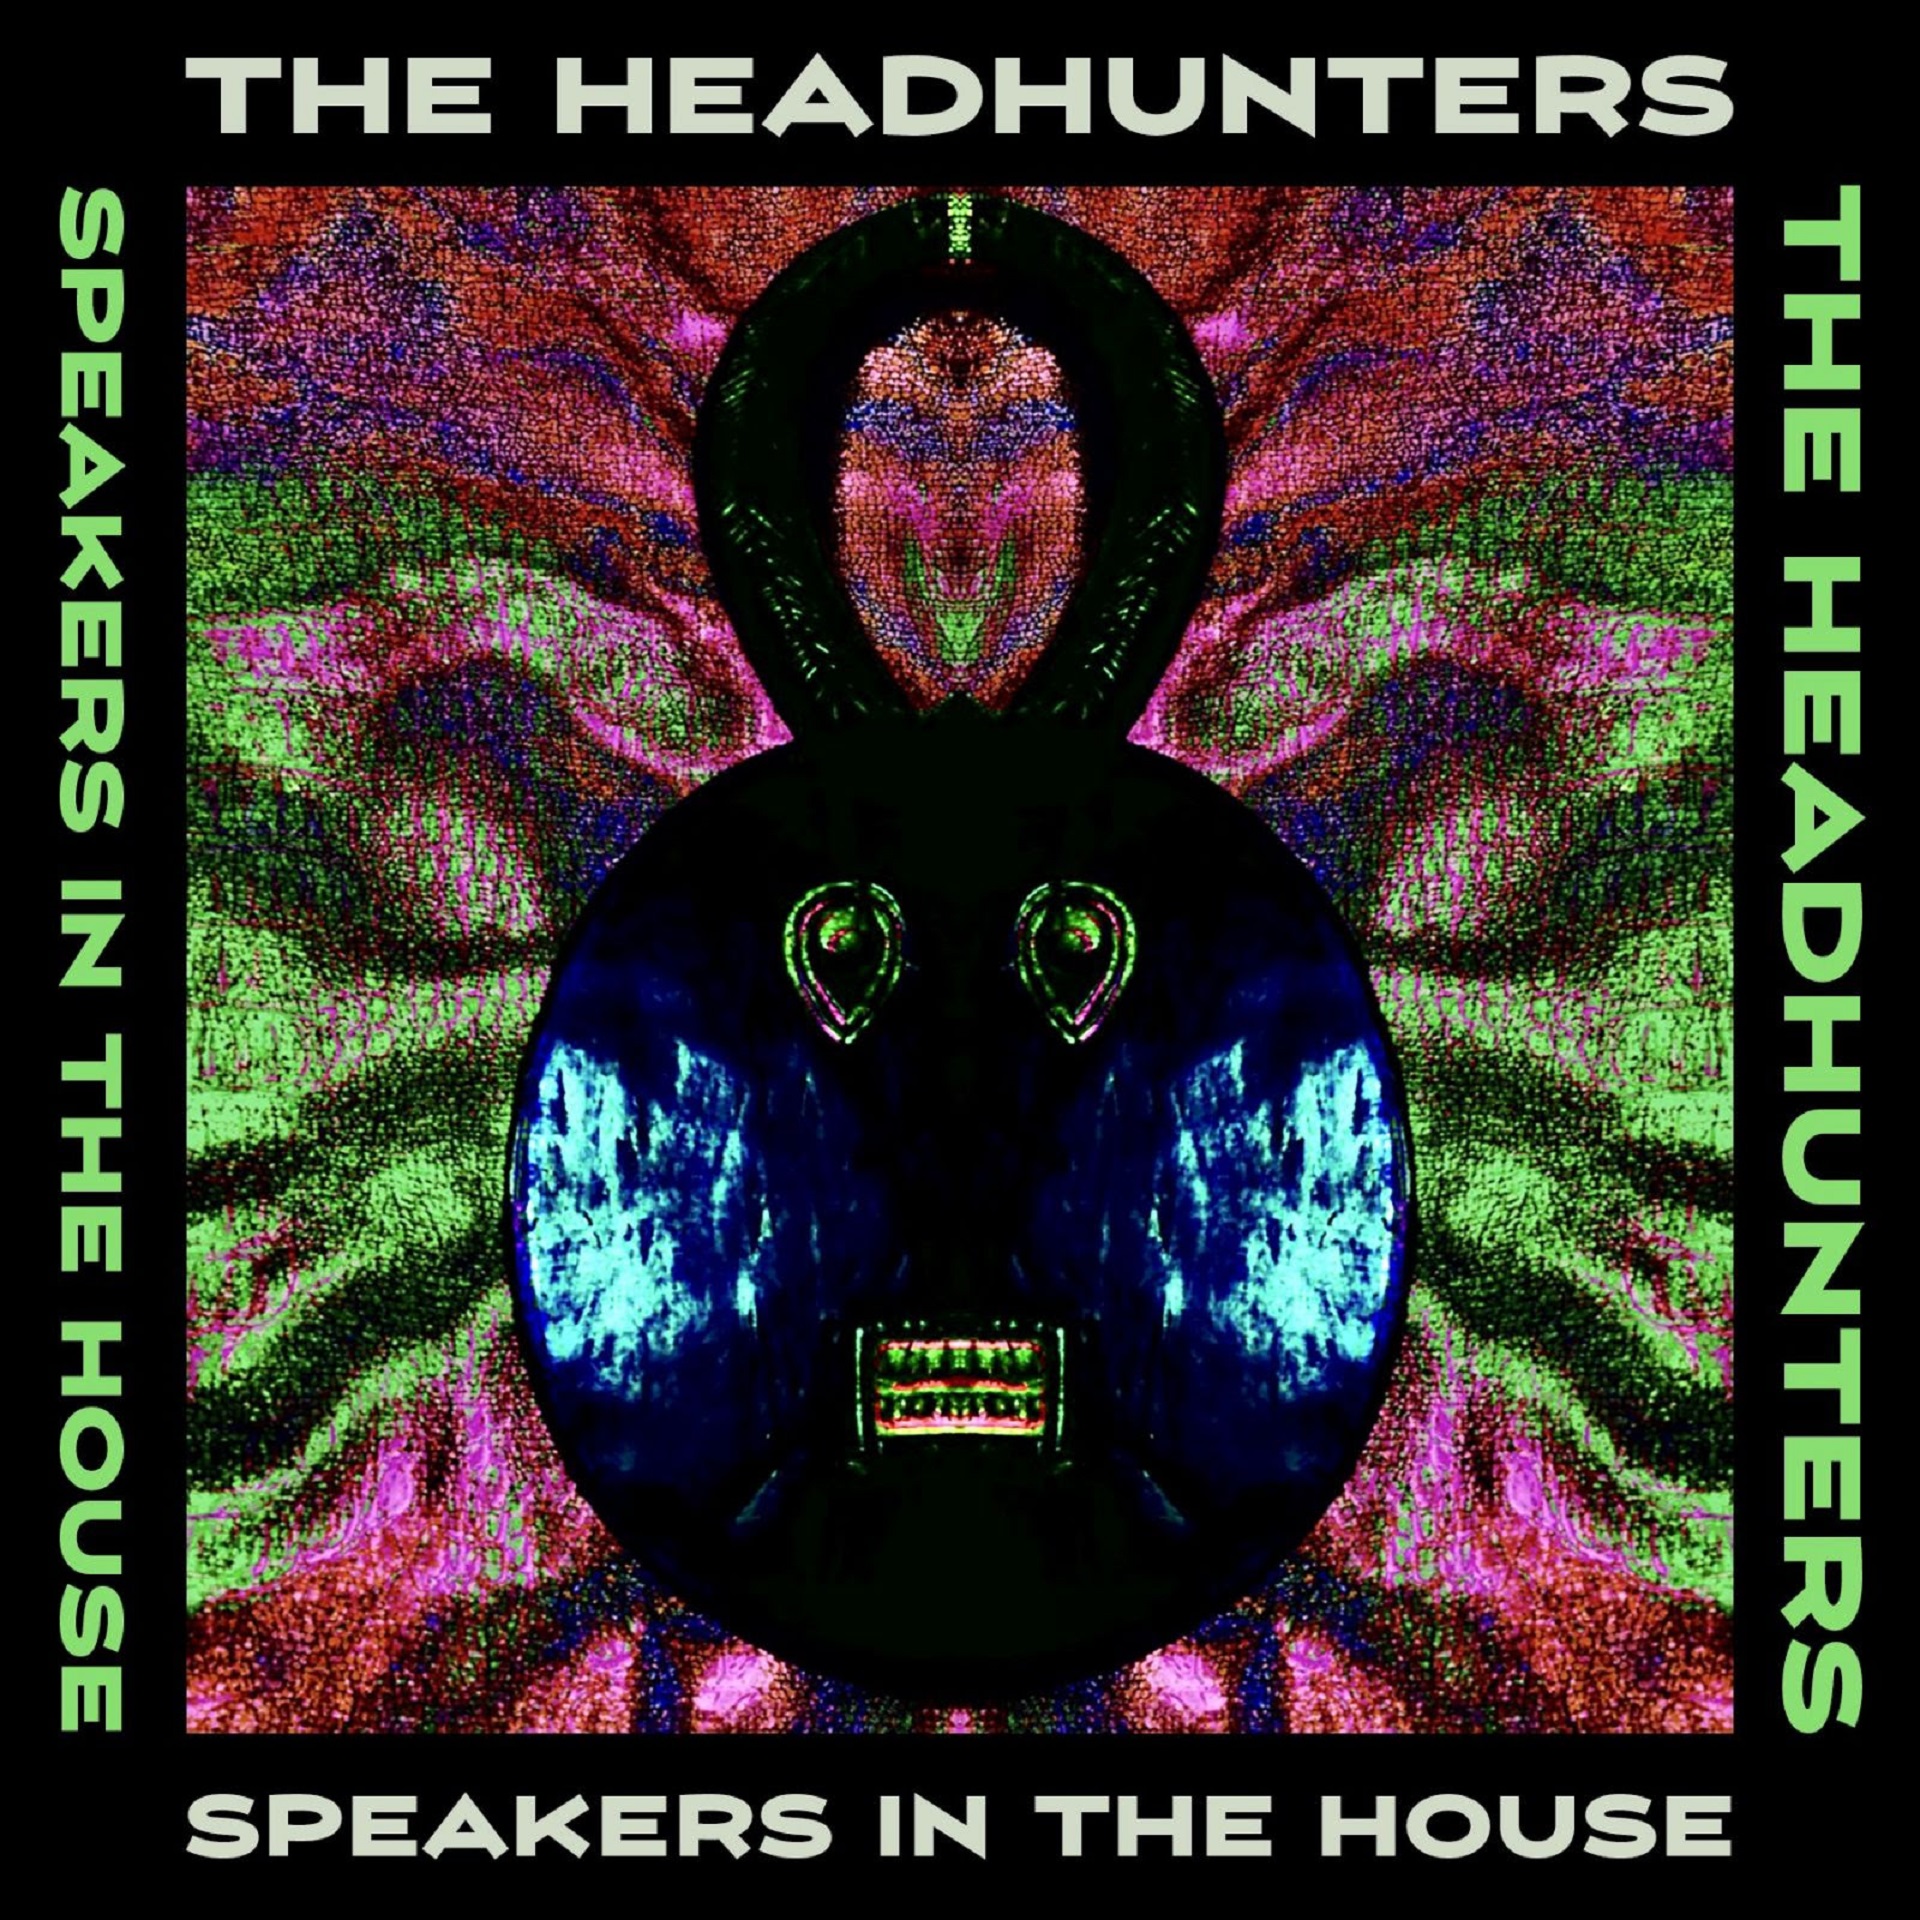 The Headhunters Release New Album 'Speakers In The House'